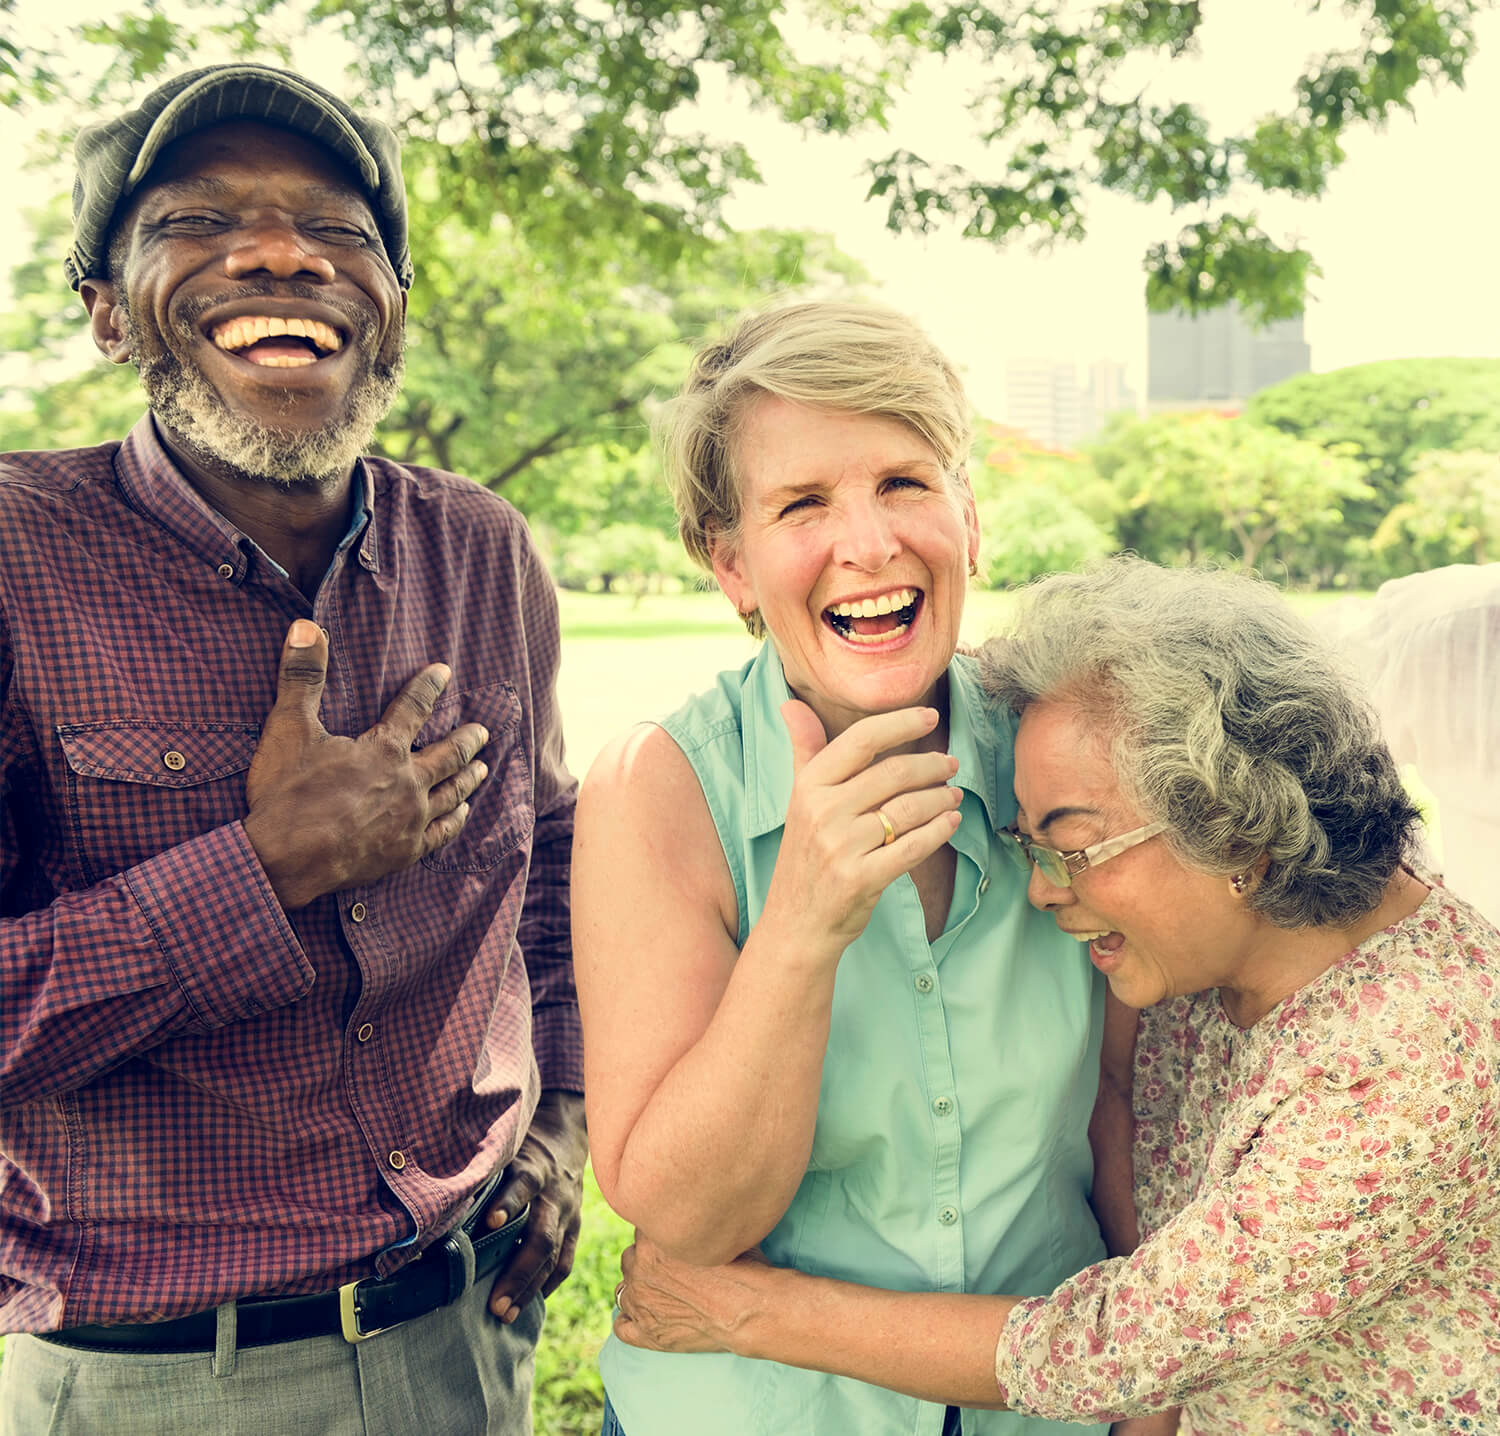 Group of mature men and woman laughing outdoors